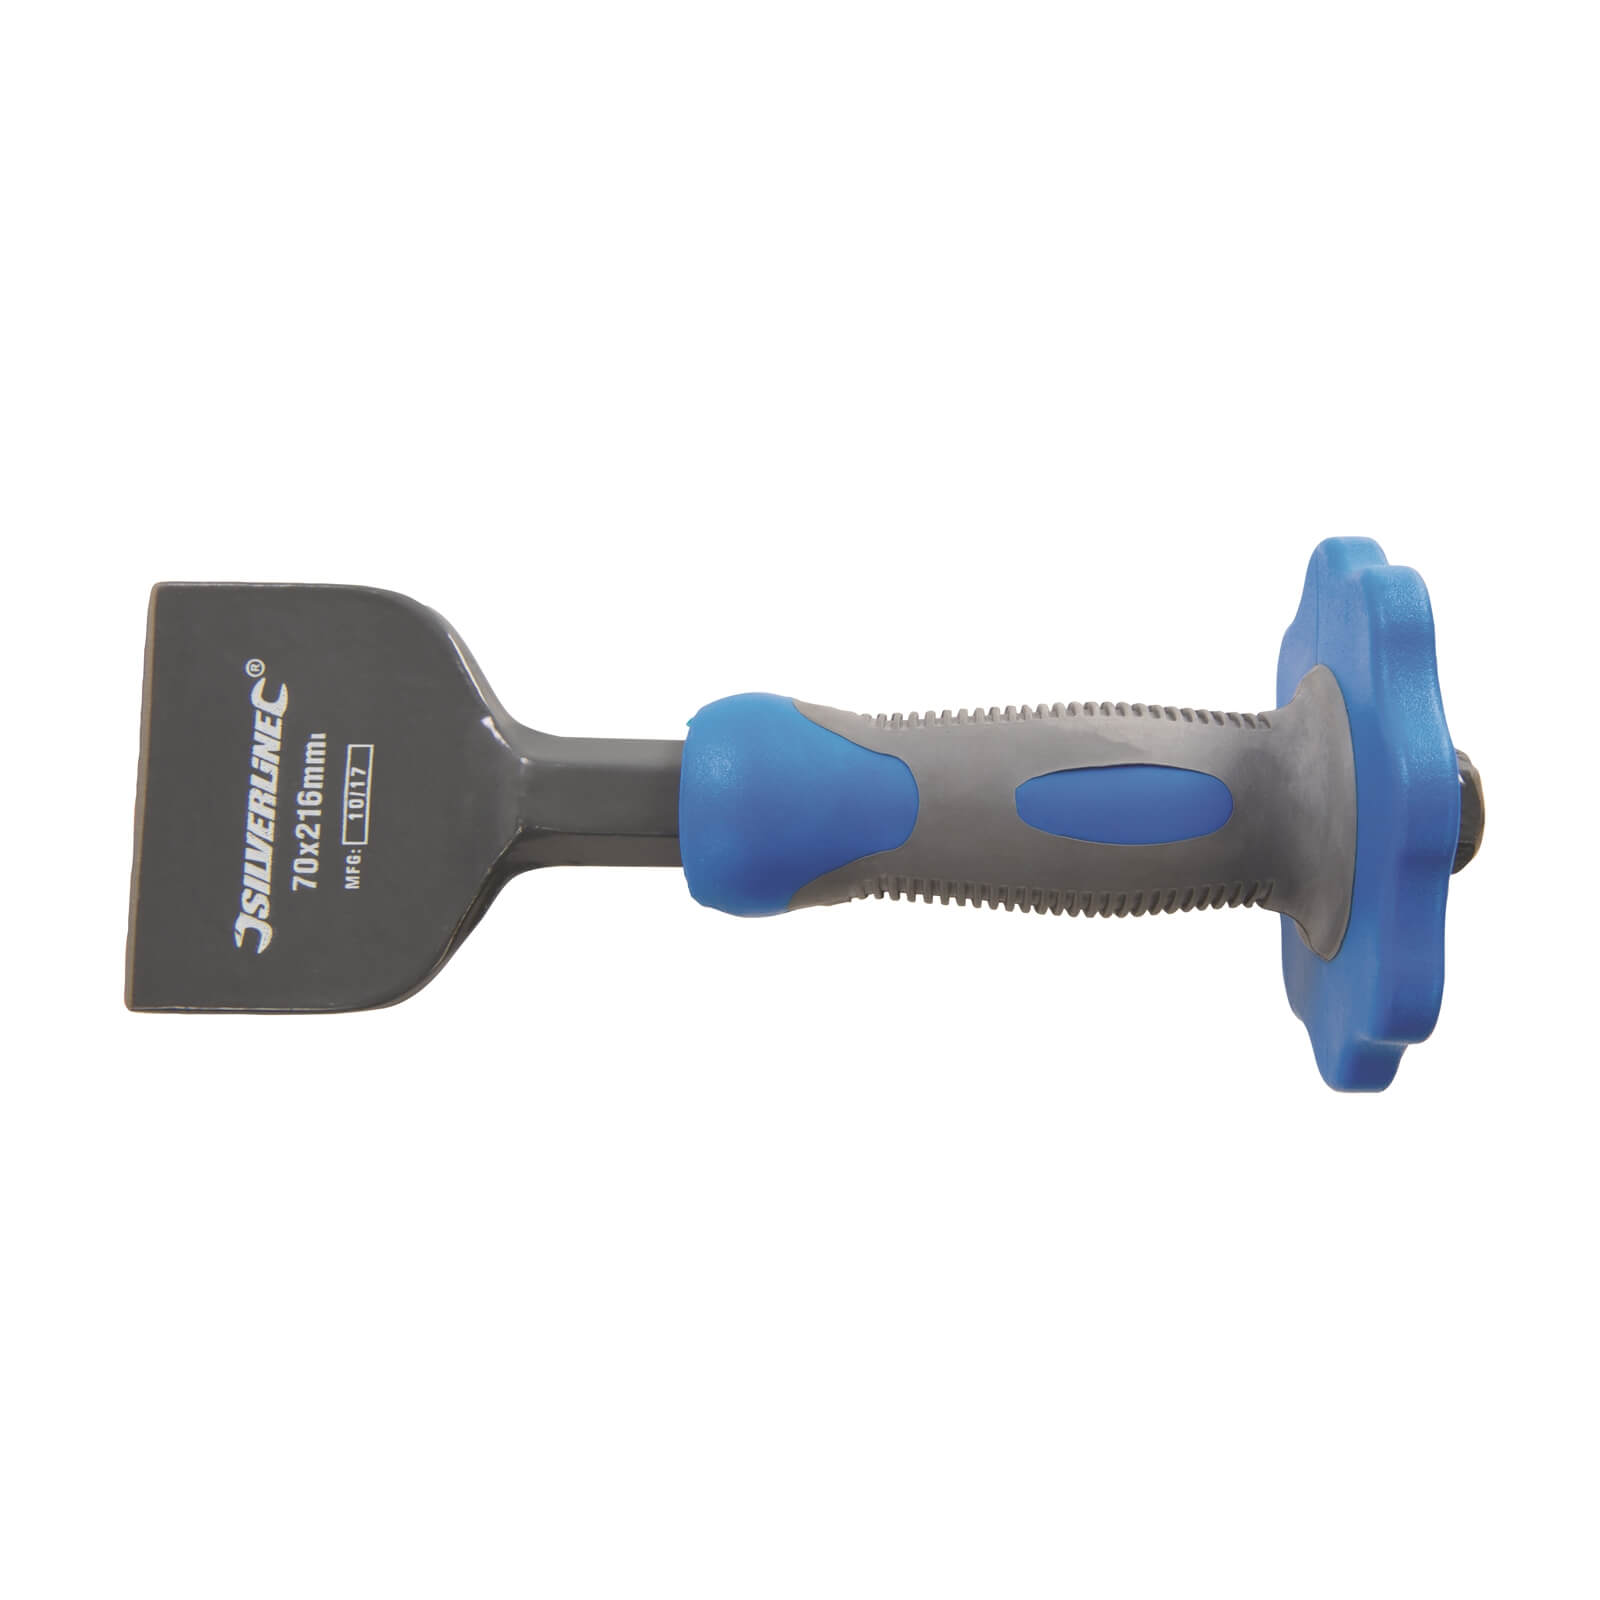 Silverline Bolster Chisel with Guard - 70 x 216 mm